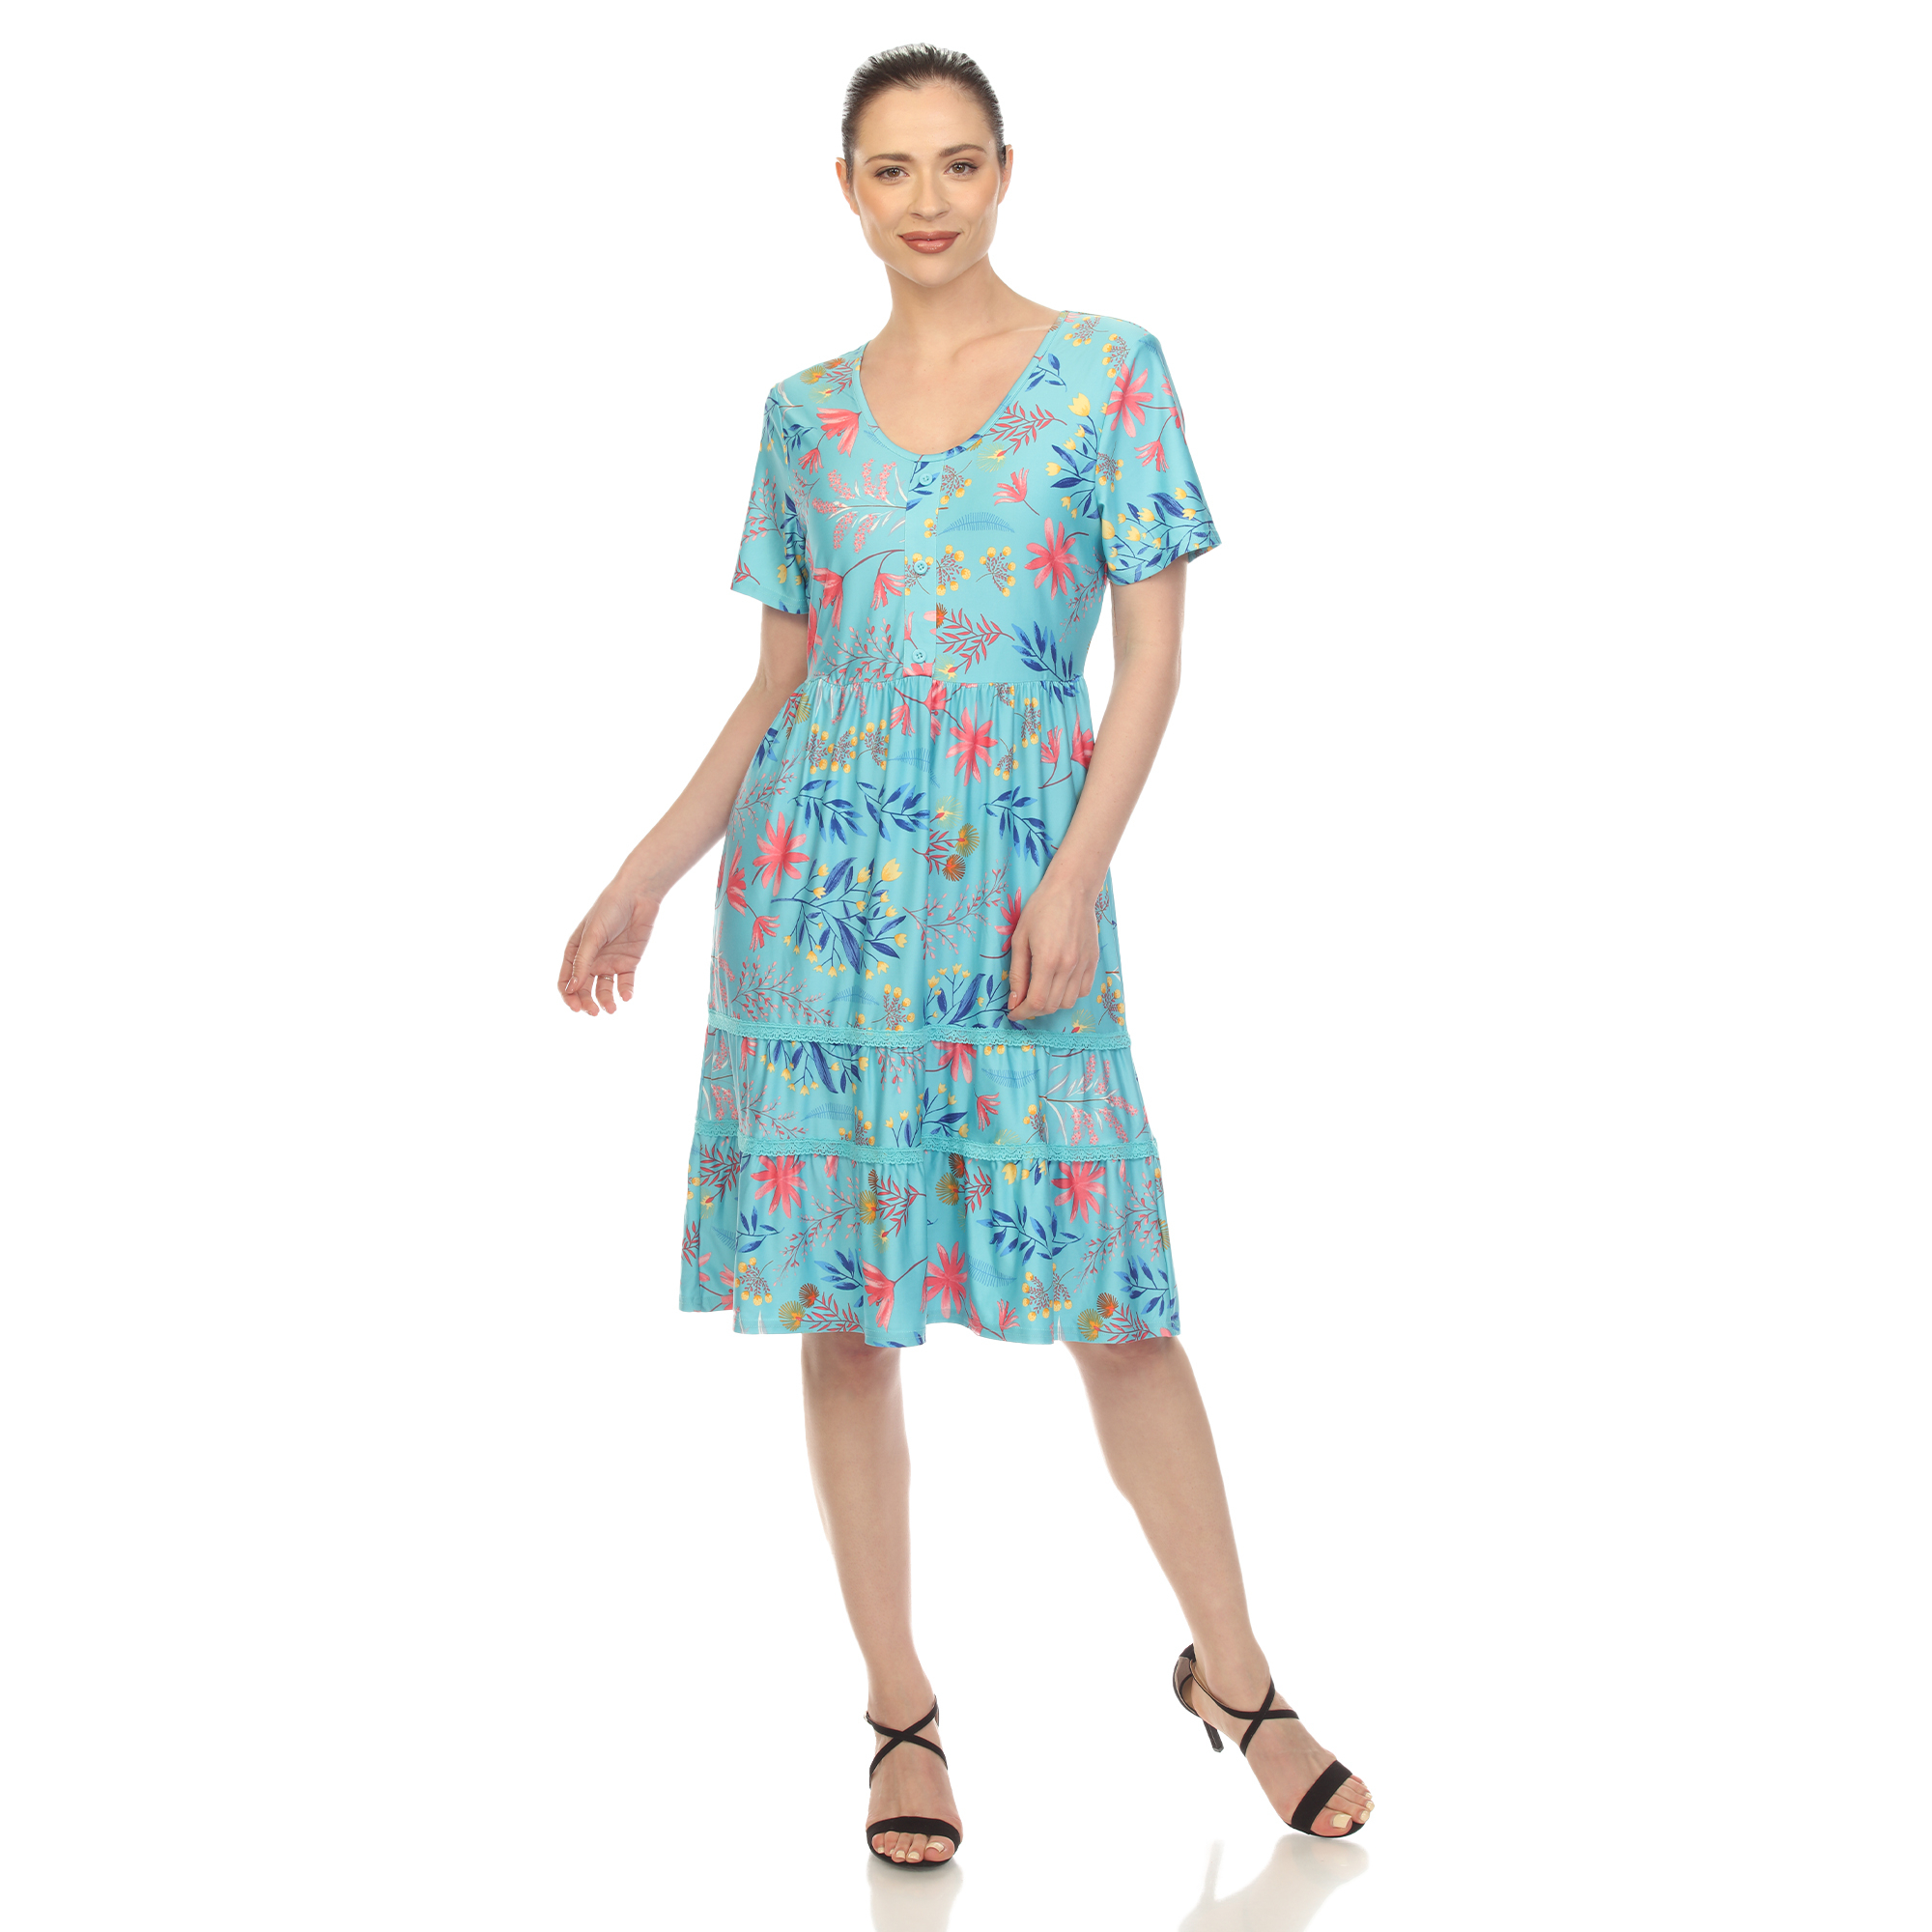 White Mark Women's Floral Short Sleeve Knee Length Tiered Dress - Blue, X-Large